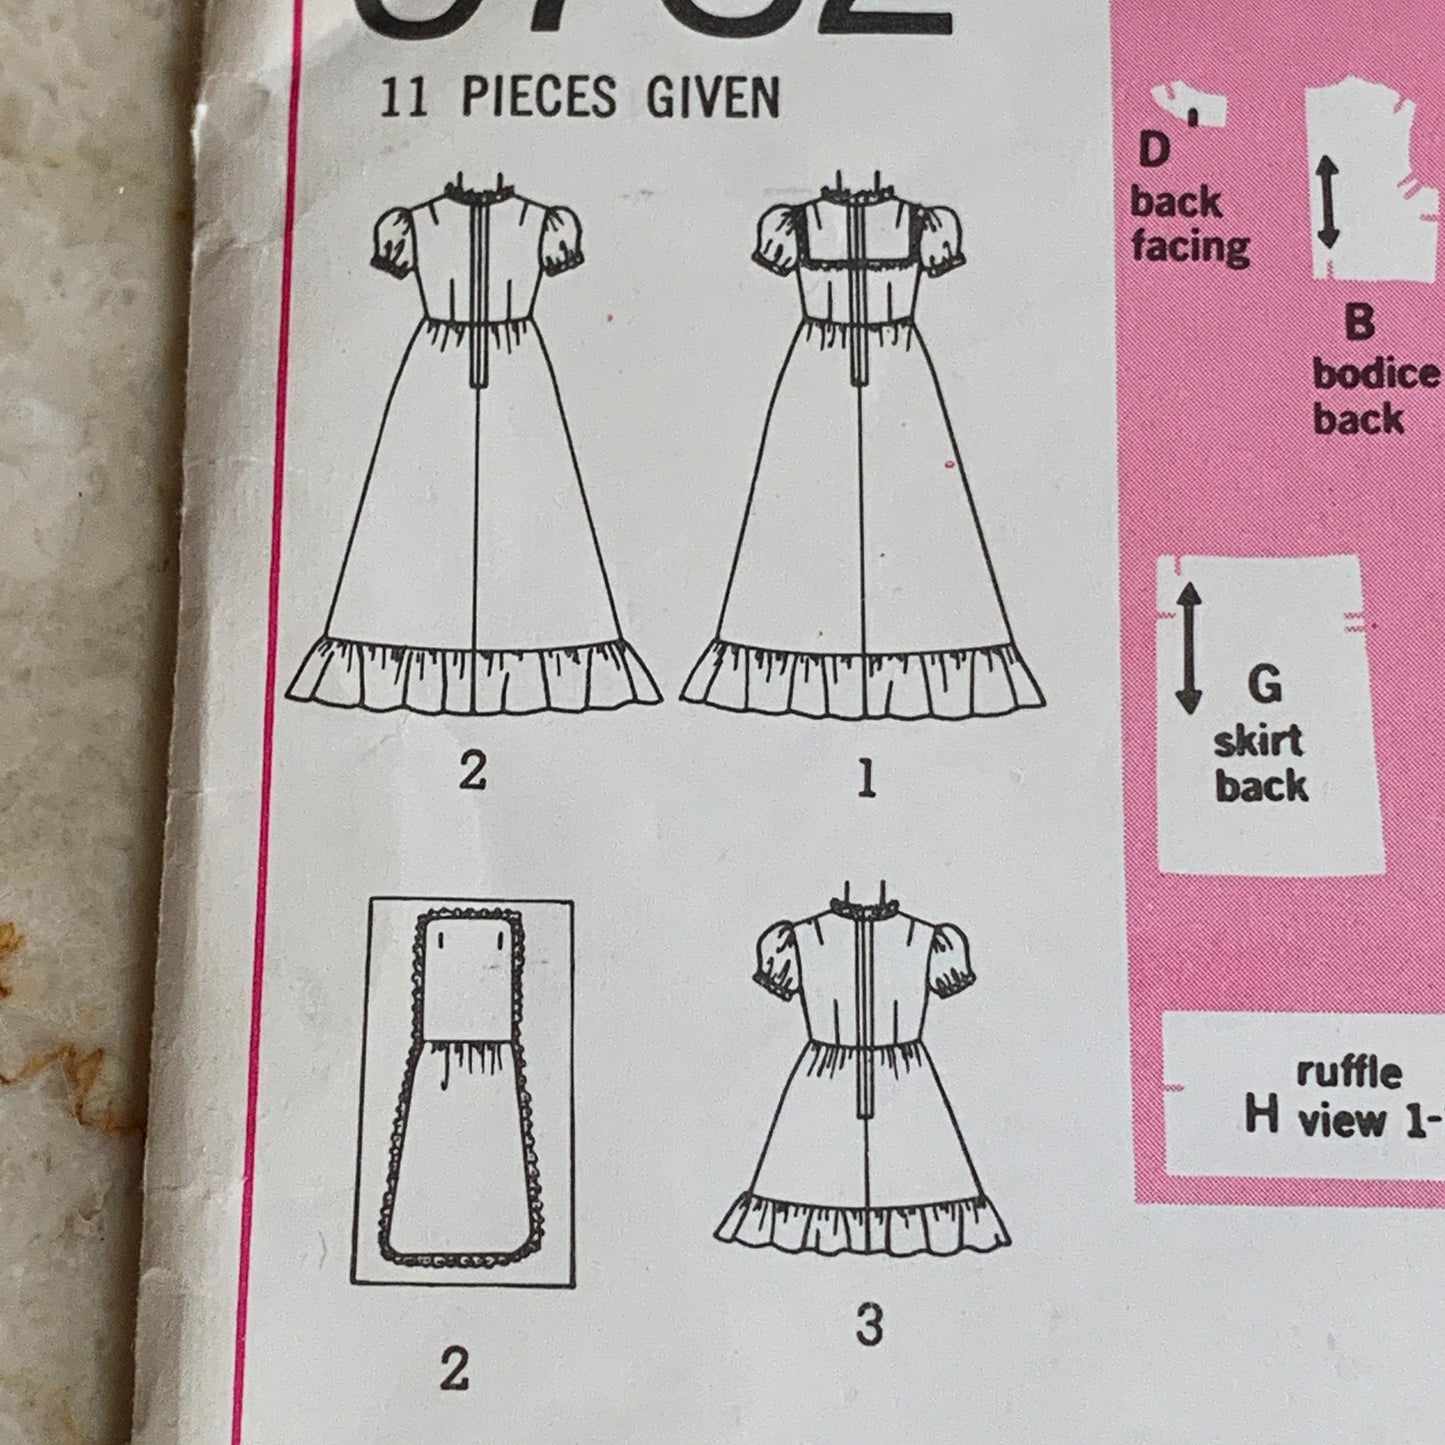 Girl’s Size 10 Dress with Apron 1971 Vintage Sewing Pattern Simplicity 9732